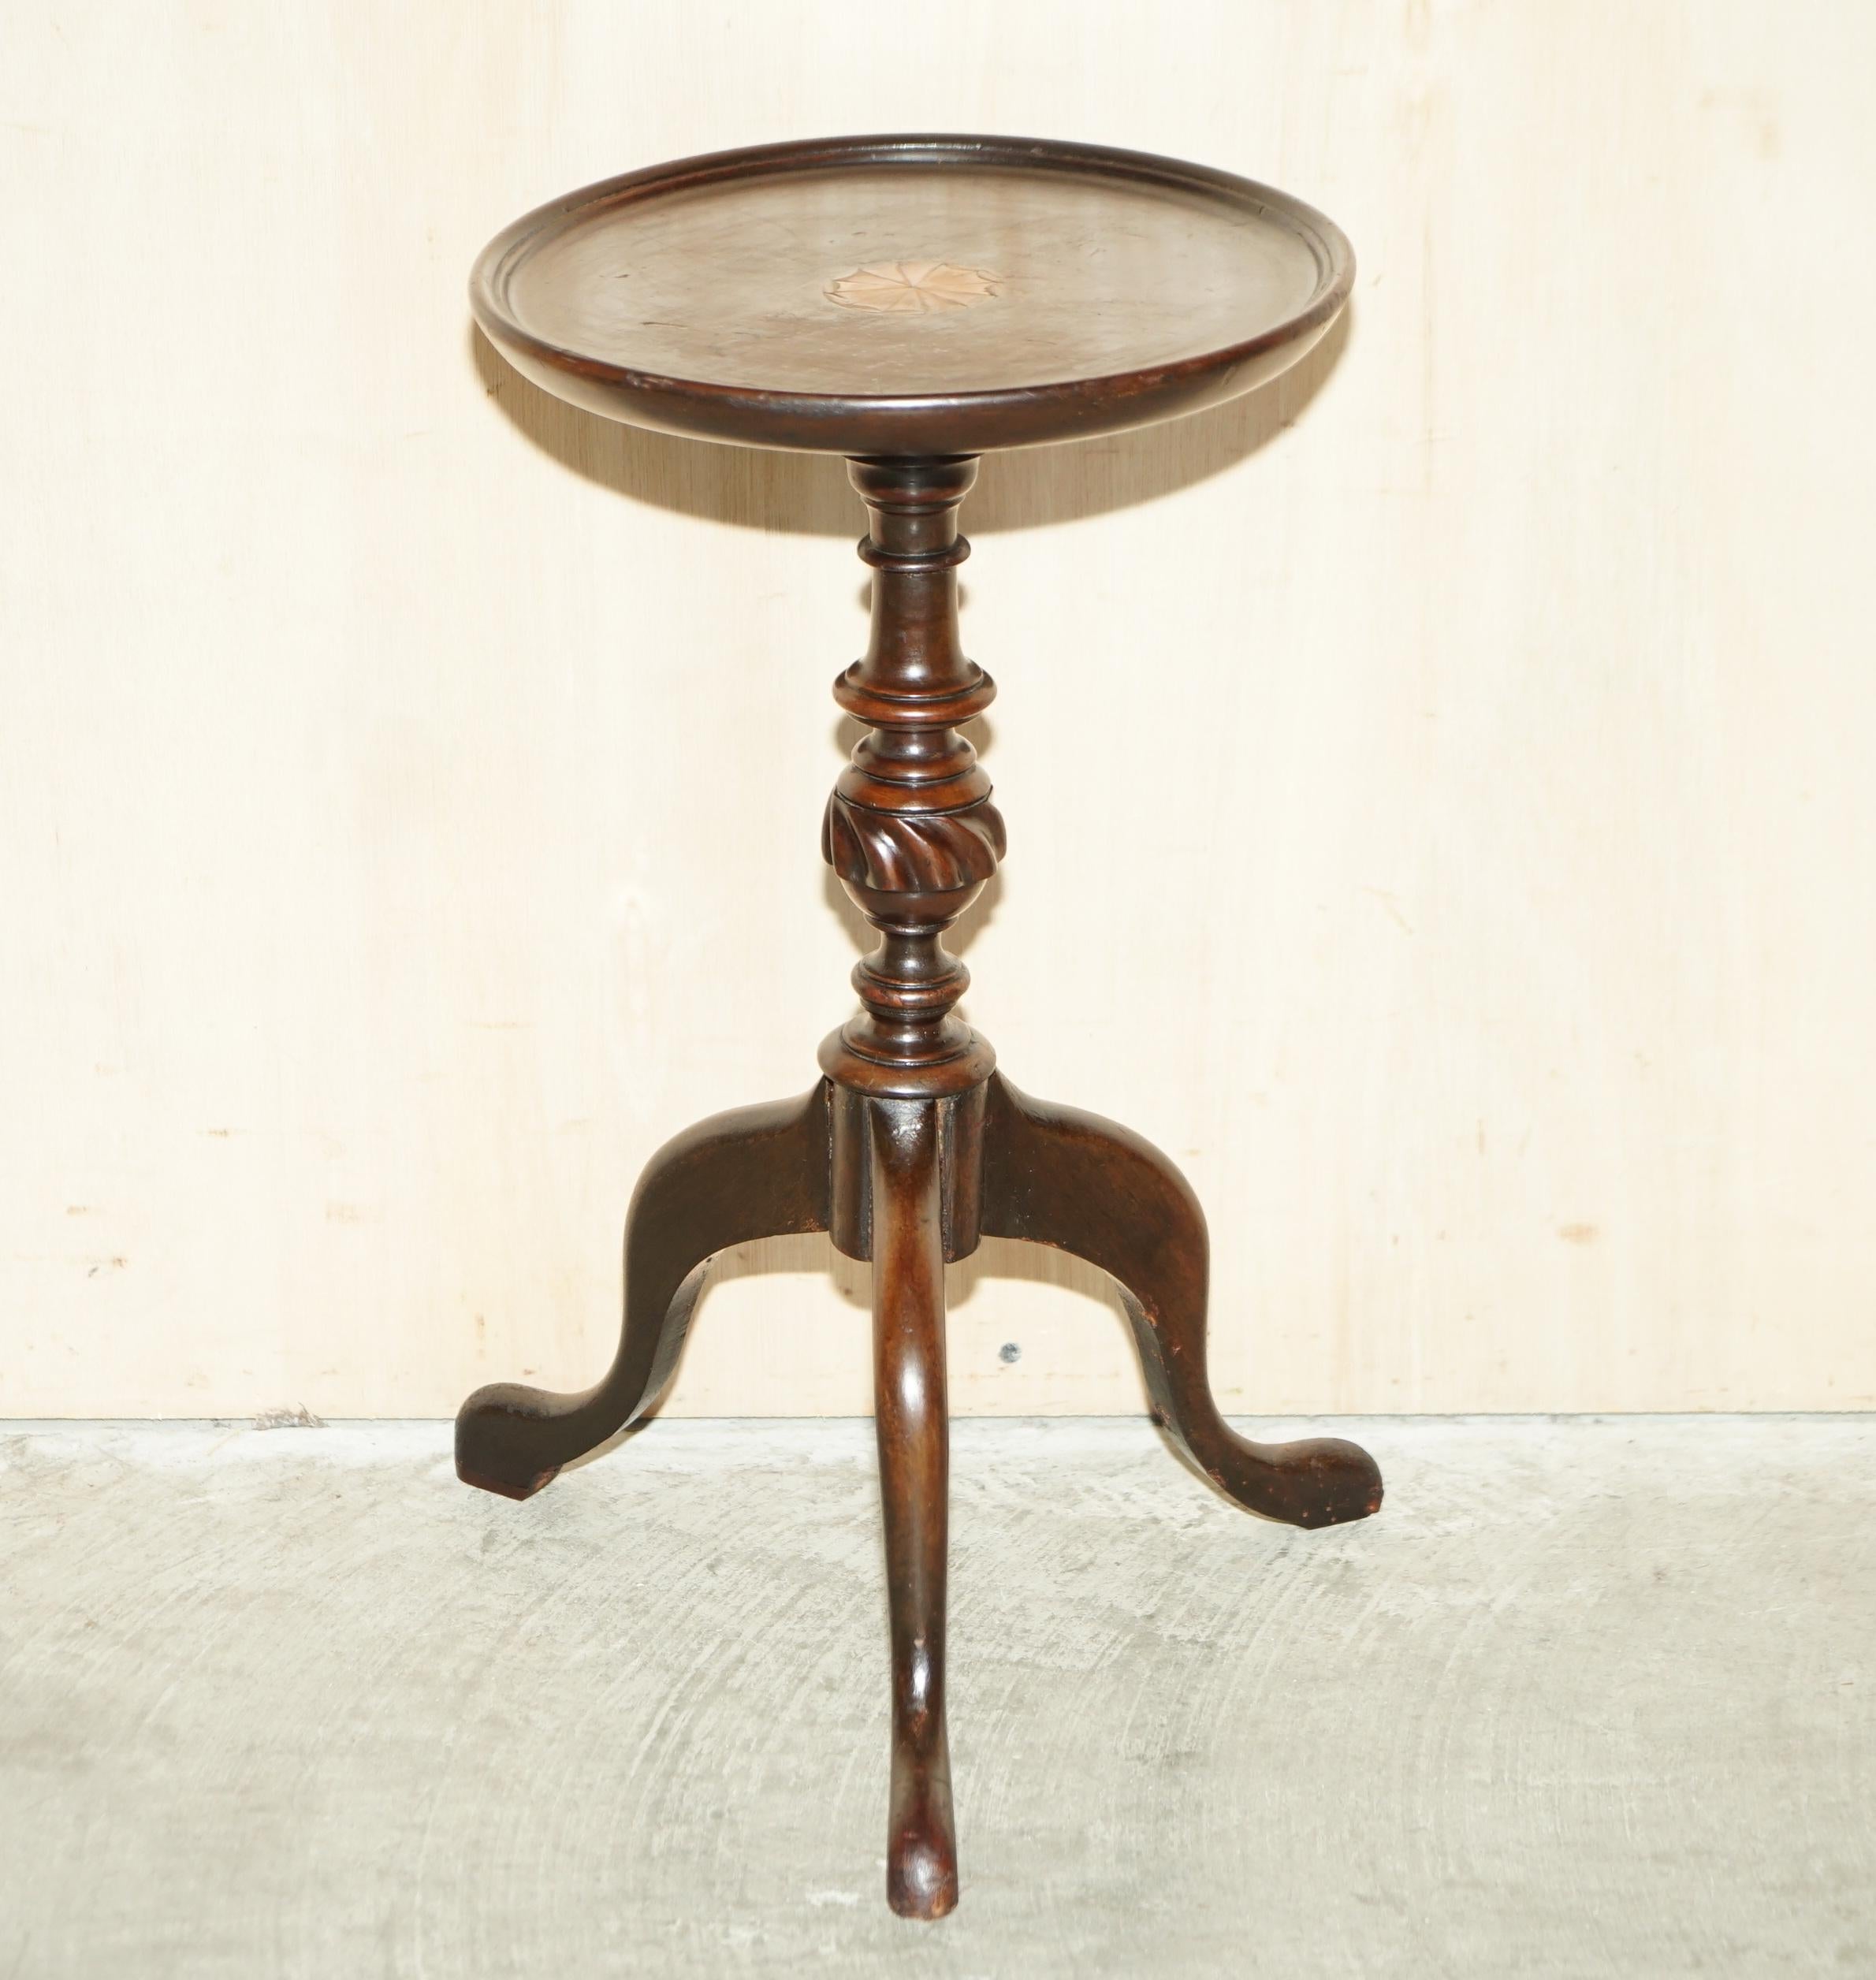 We are delighted to offer for sale this late Victorian Sheraton Revival tripod table with nicely turned base

A very good looking well made and decorative piece, it sits well in any setting and is very unitarian. The piece has the Sheraton revival